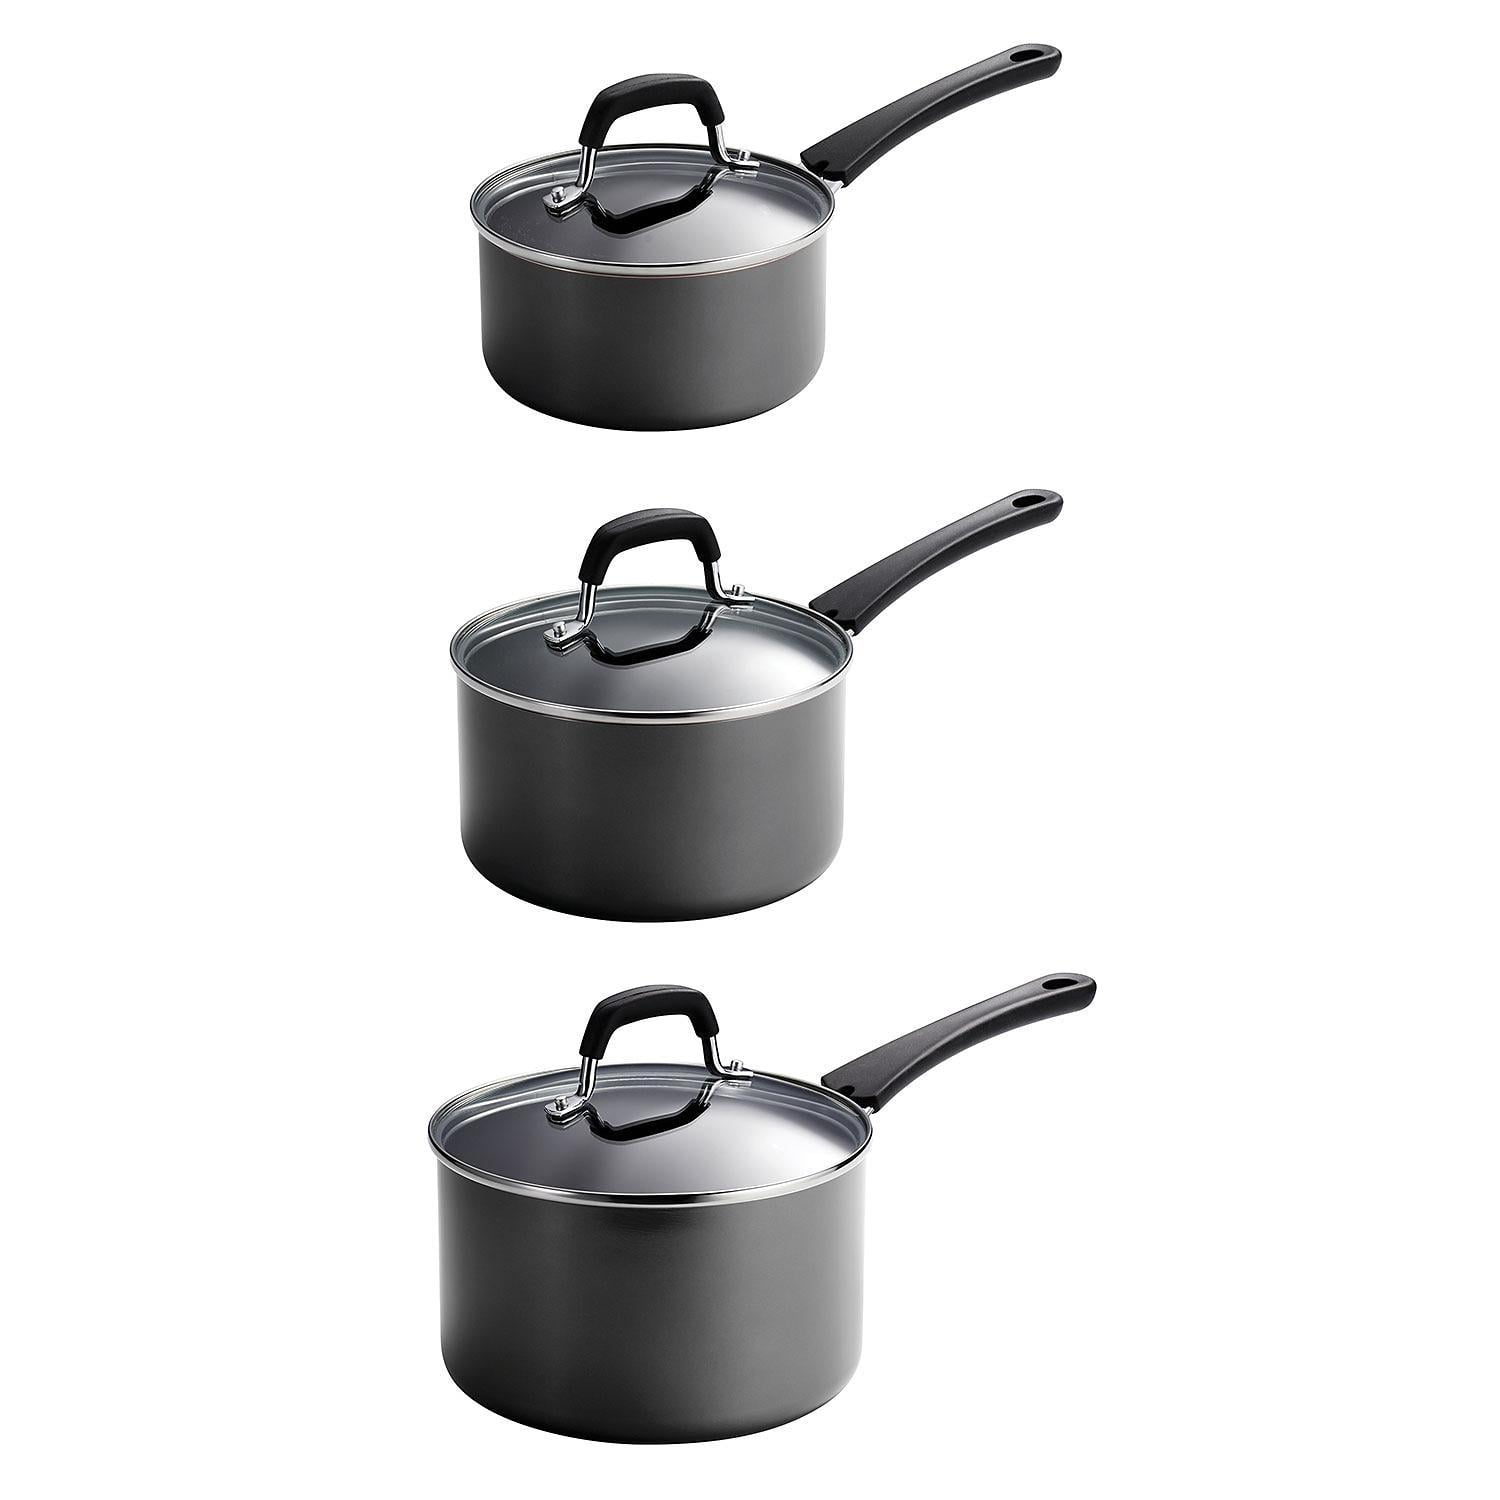 Tramontina tramontina 6 pc stainless steel stackable cookware set,  80154/547ds